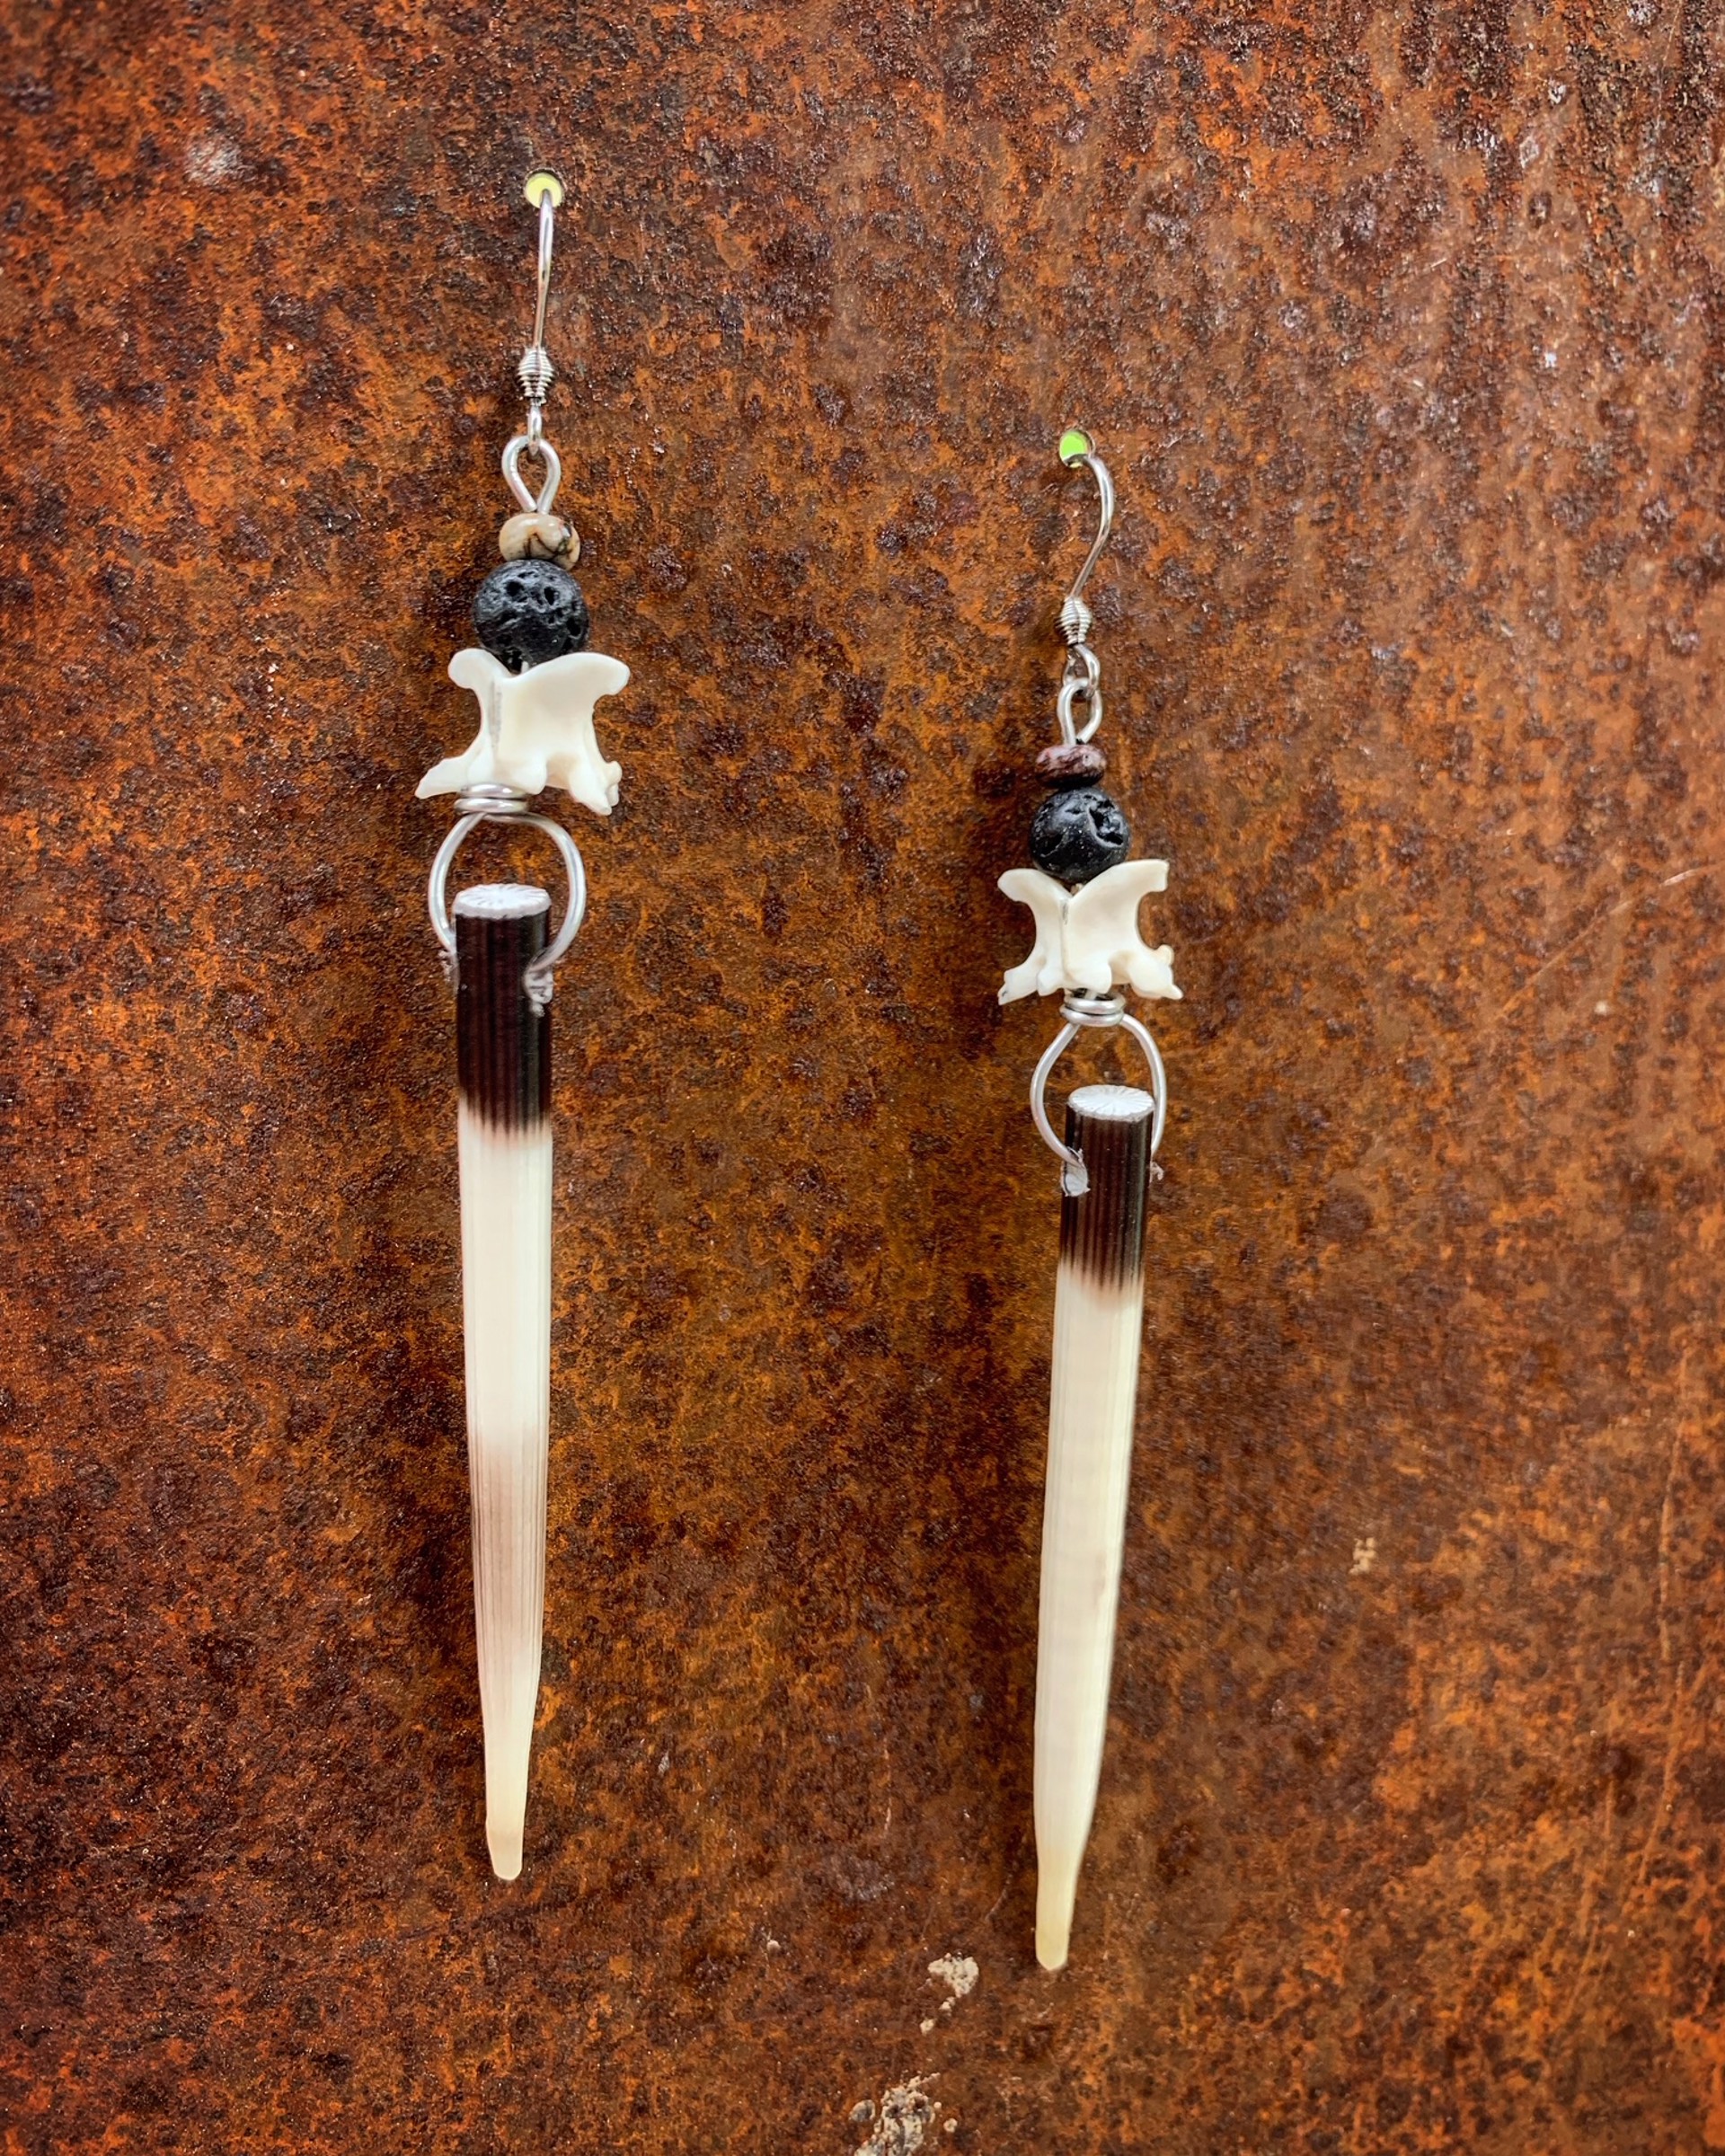 832 African Porcupine Quills with Lava and Rattlesnake Bones by Kelly Ormsby